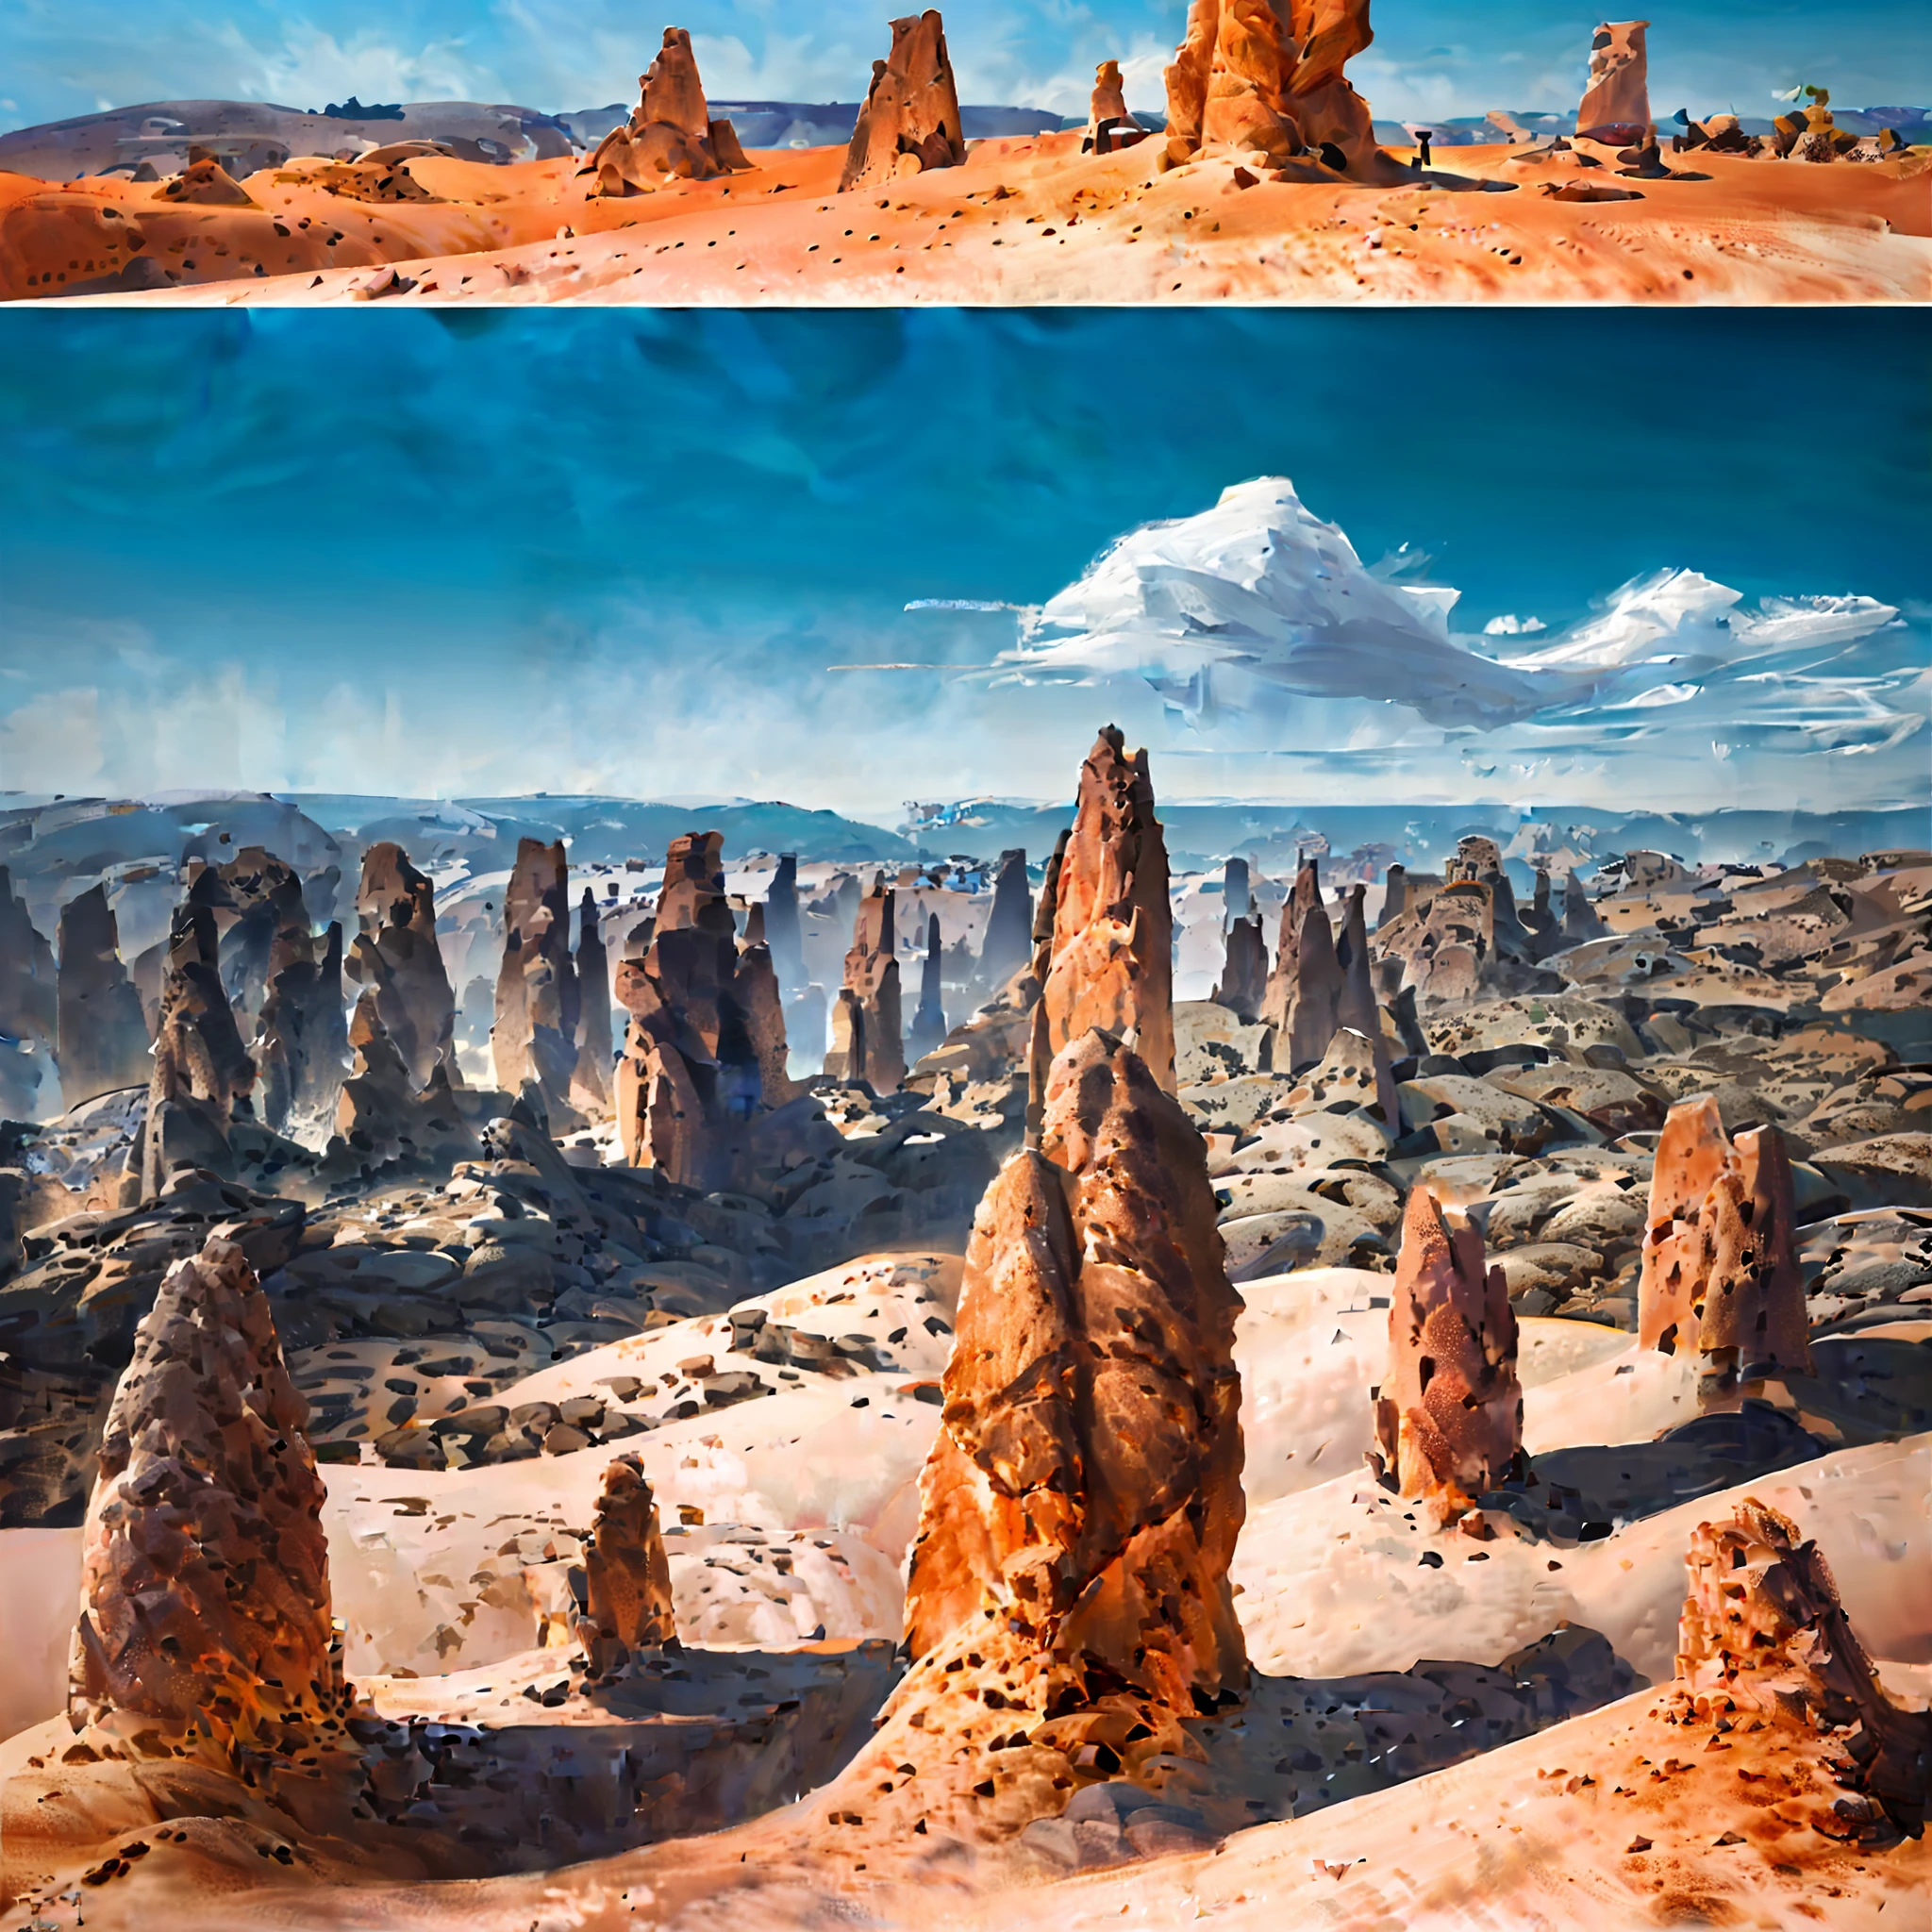 there are two pictures of a desert with a few rocks, 3 d render and matte painting, amazing alien landscape, sand and desert environment, organic matte painting, stunning alien landscape, highly detailed matte painting, 3d rendered matte painting, hyperdetailed 3 d matte painting, hyperdetailed 3d matte painting, desert scenery, matte painting in fantasy style, beautiful alien landscape